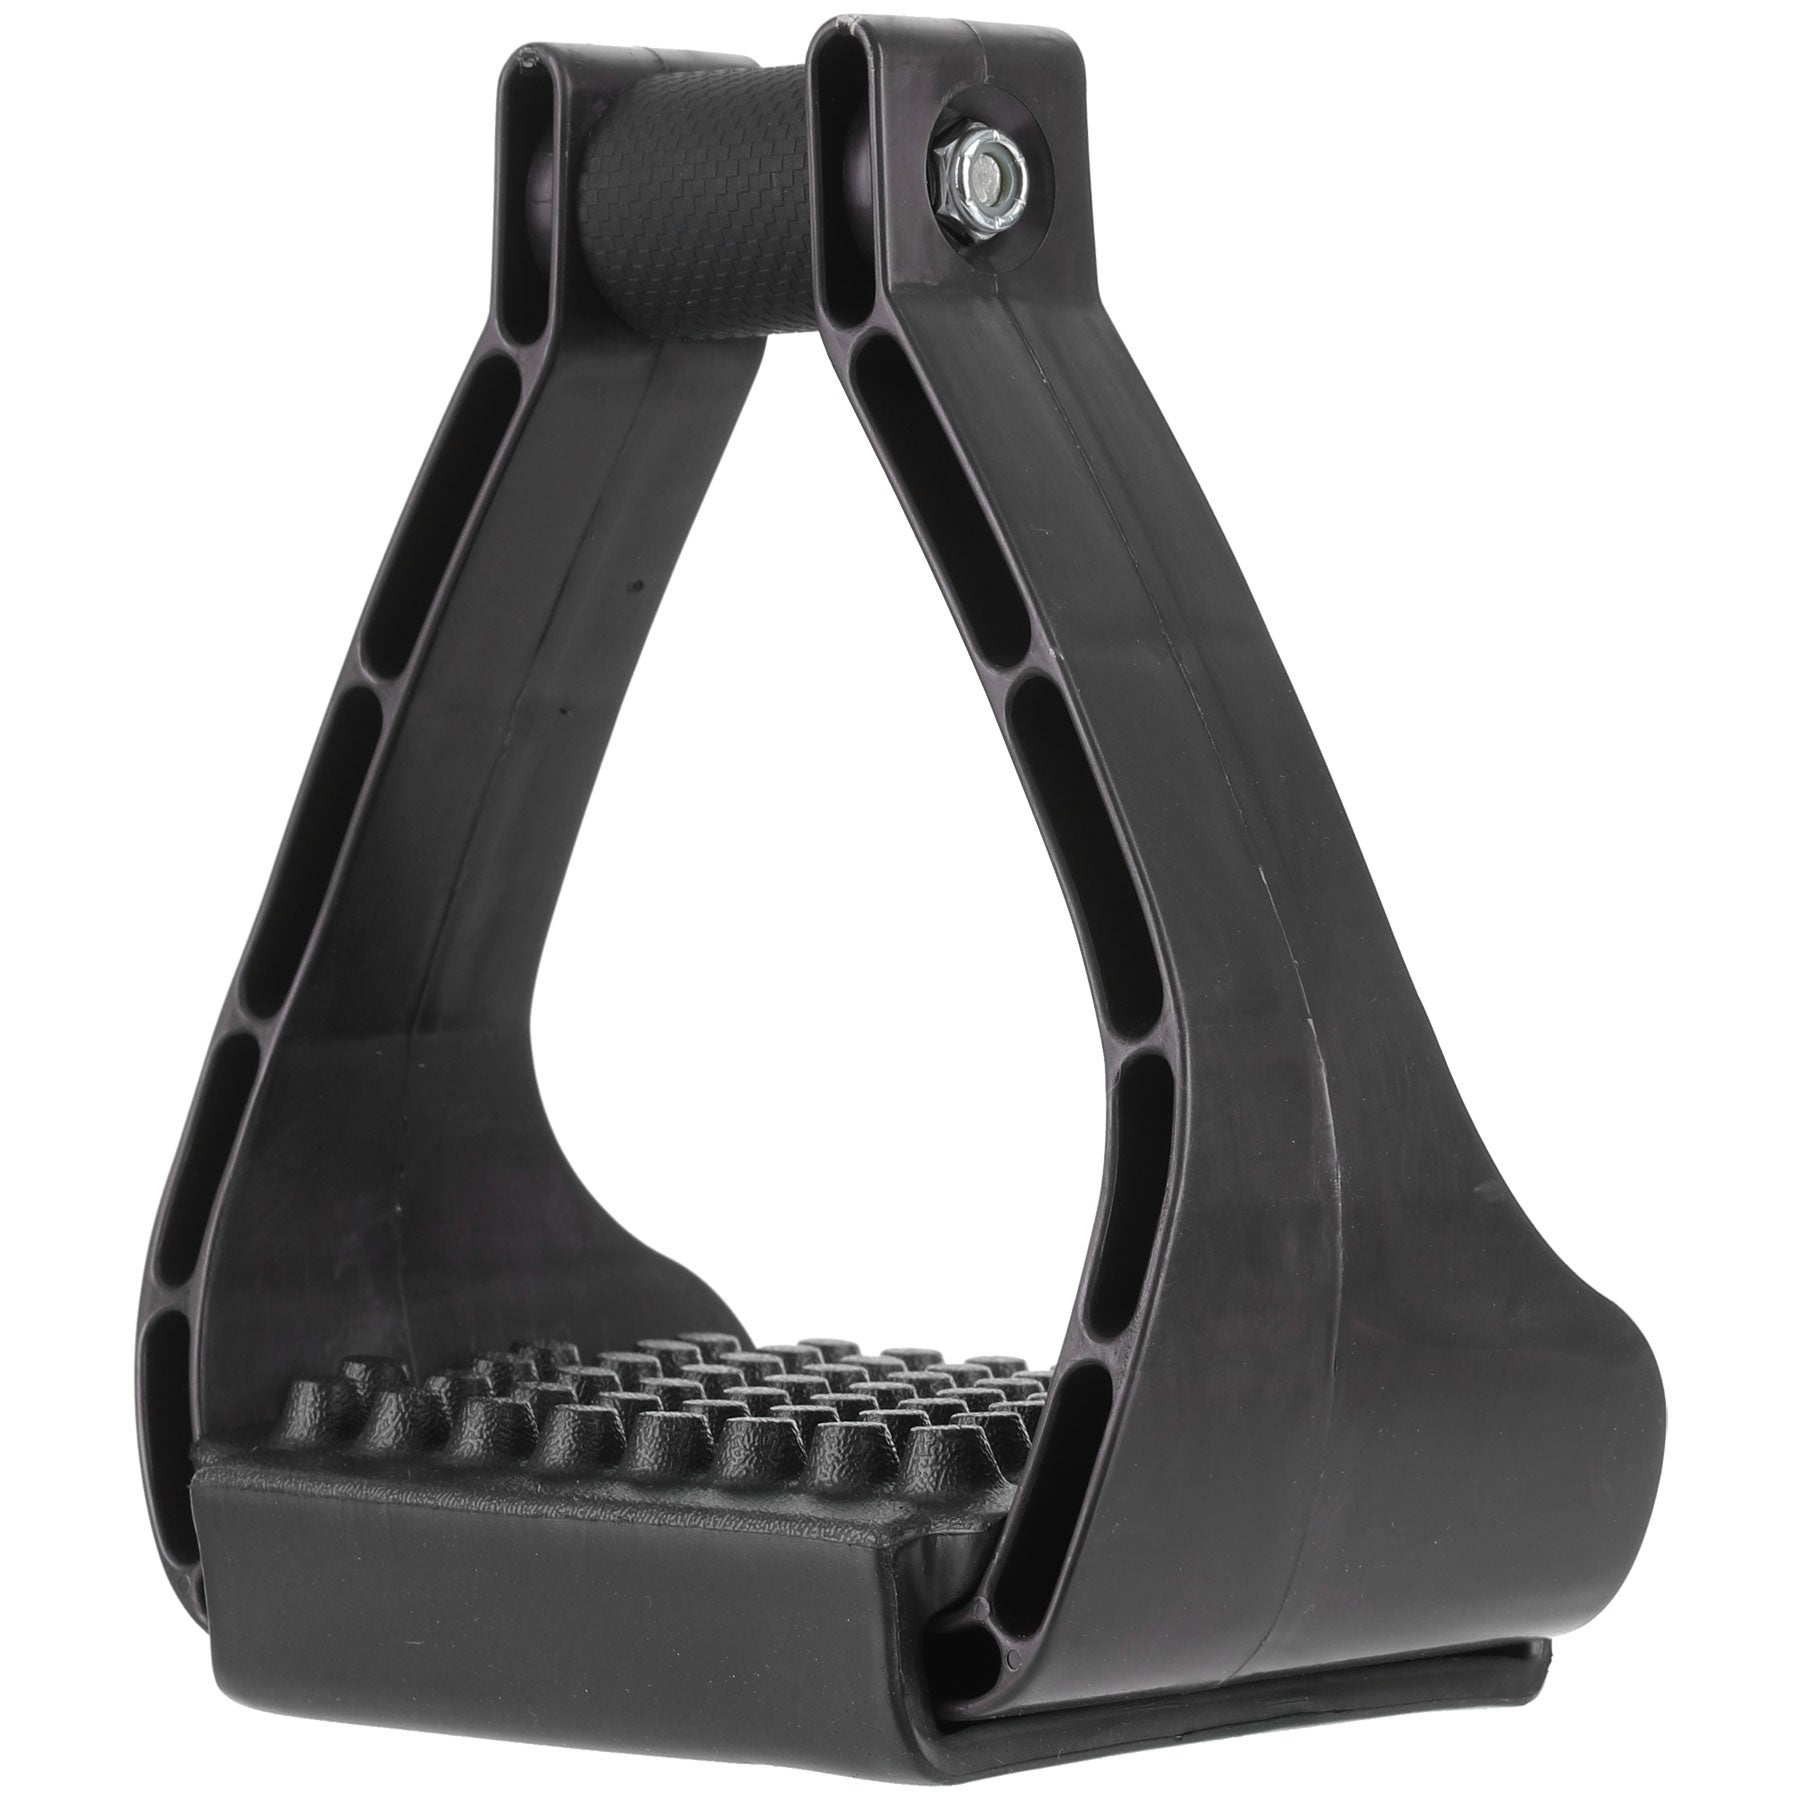 SHOWMAN BLACK Molded Plastic Endurance Stirrups With Rubber 4" Treads! 